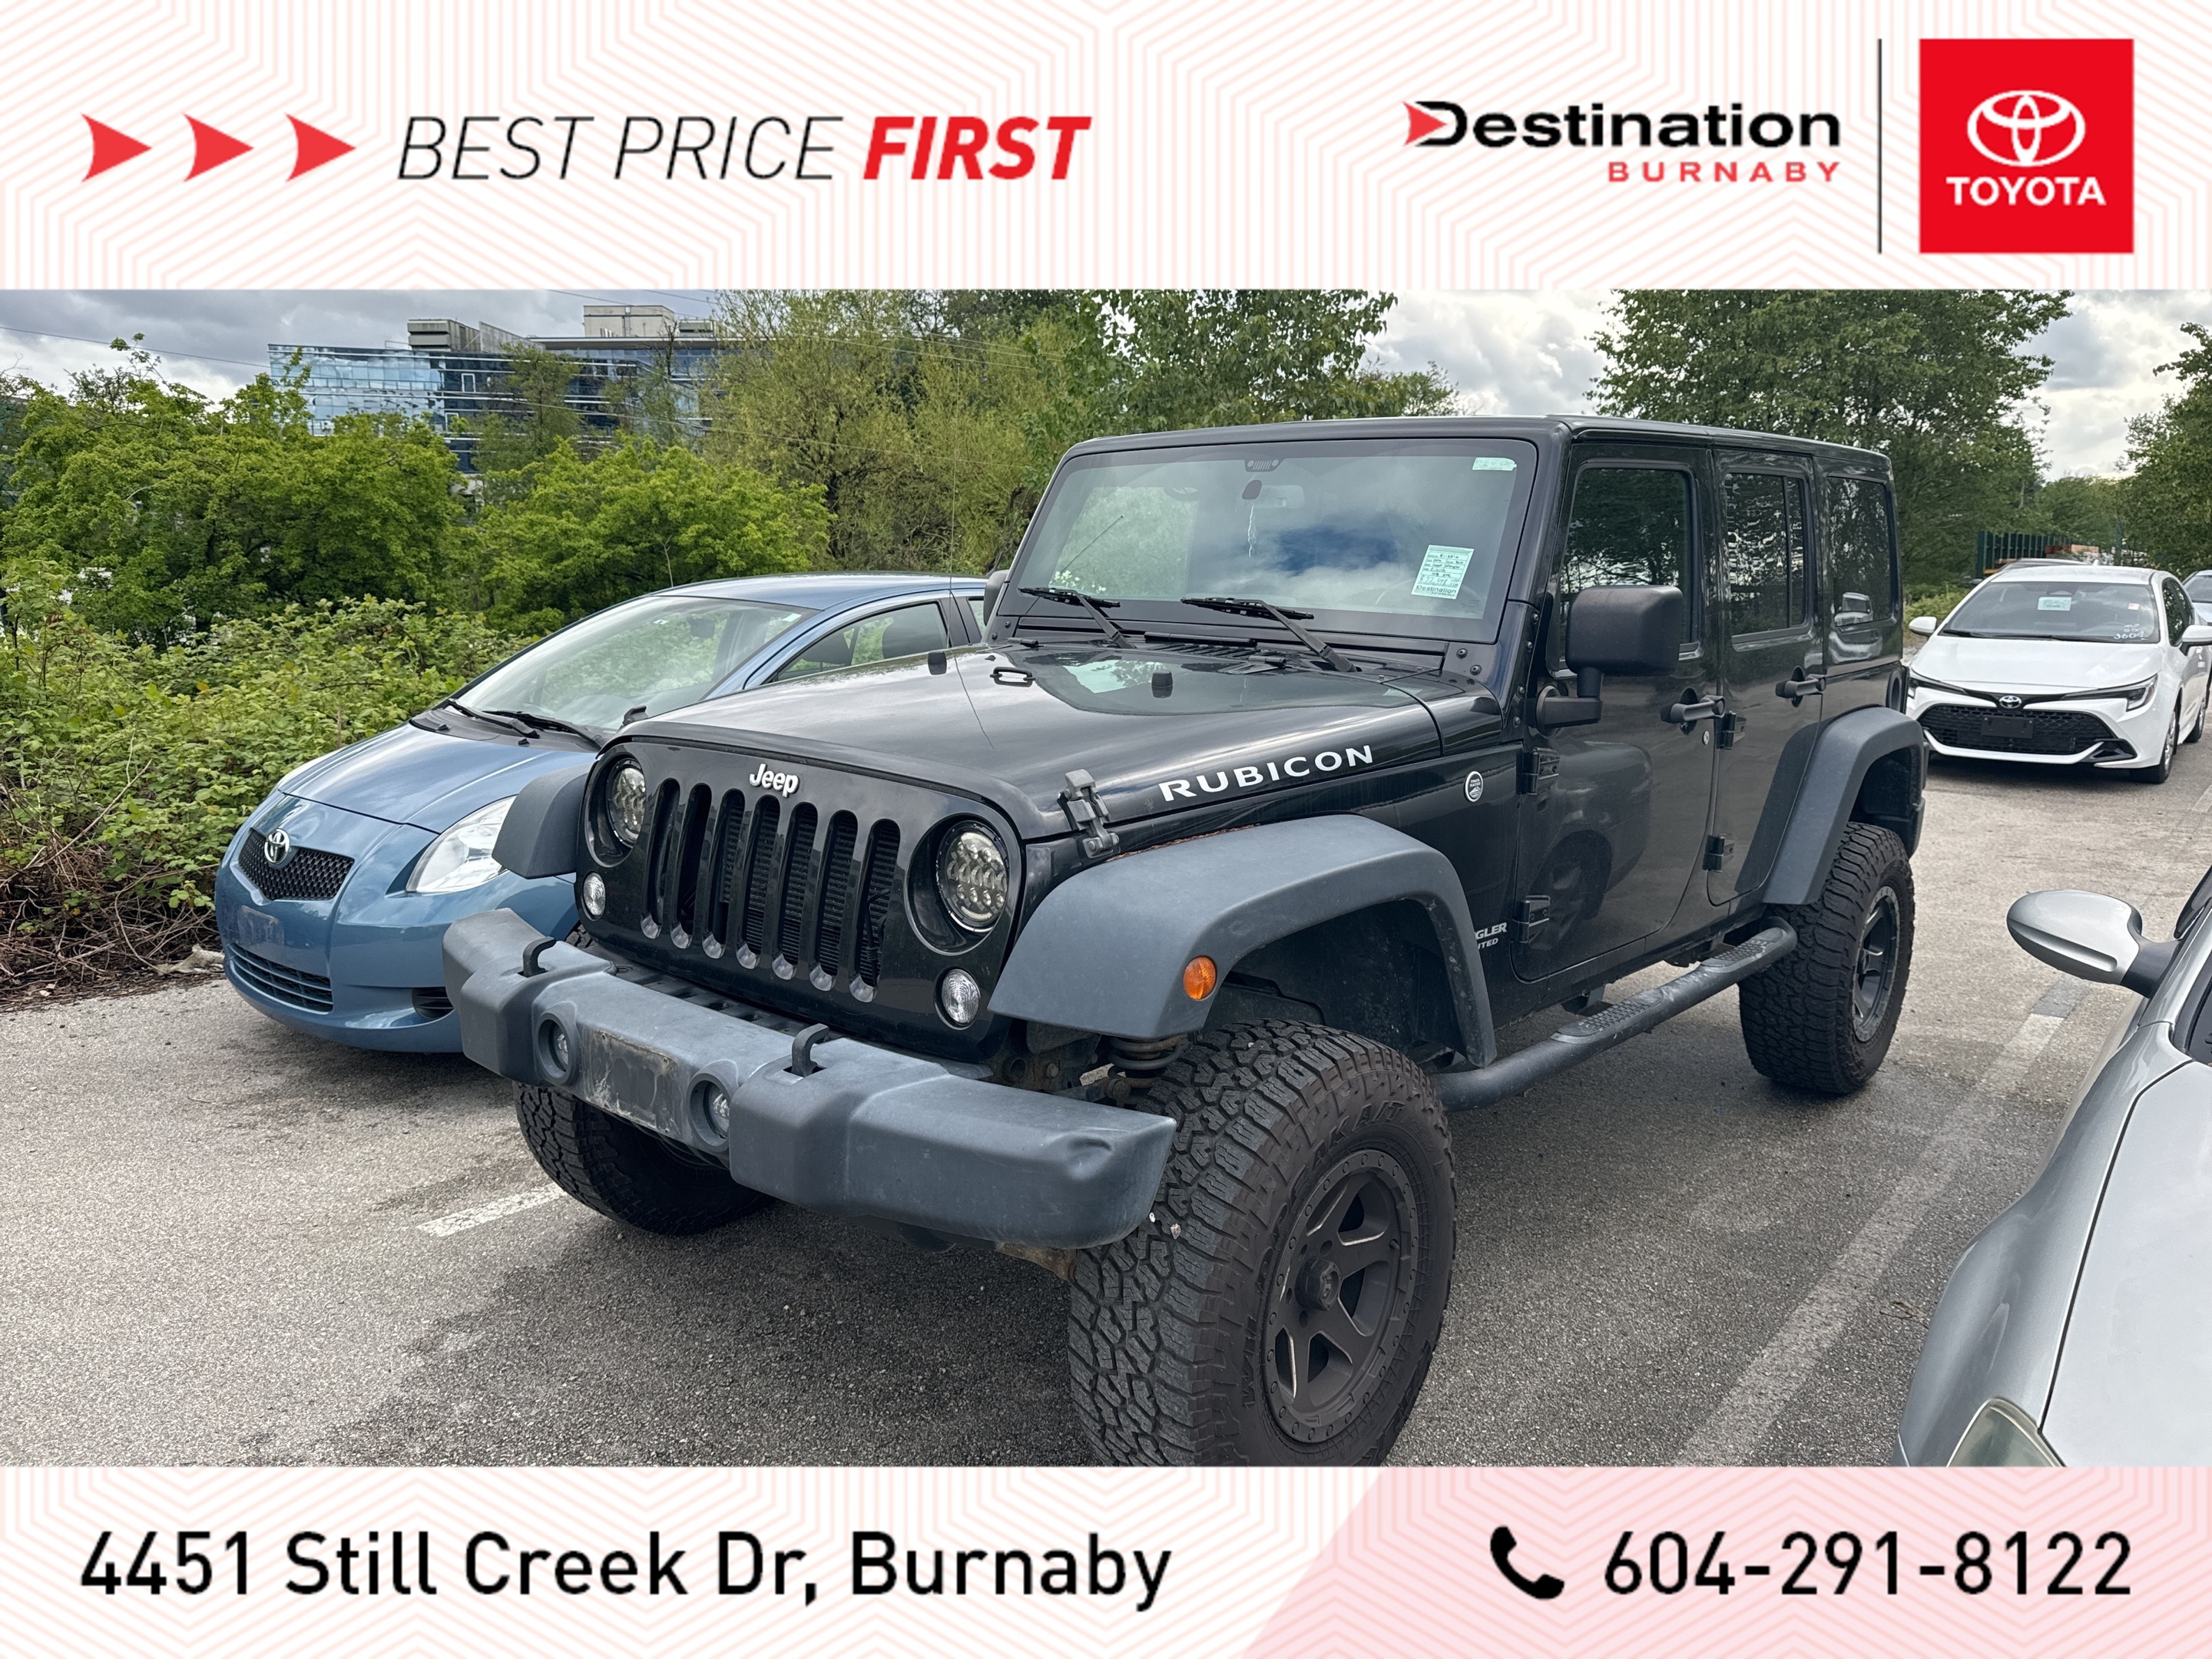 2016 Jeep WRANGLER UNLIMITED Rubicon Local No Accidents Fully Packaged!